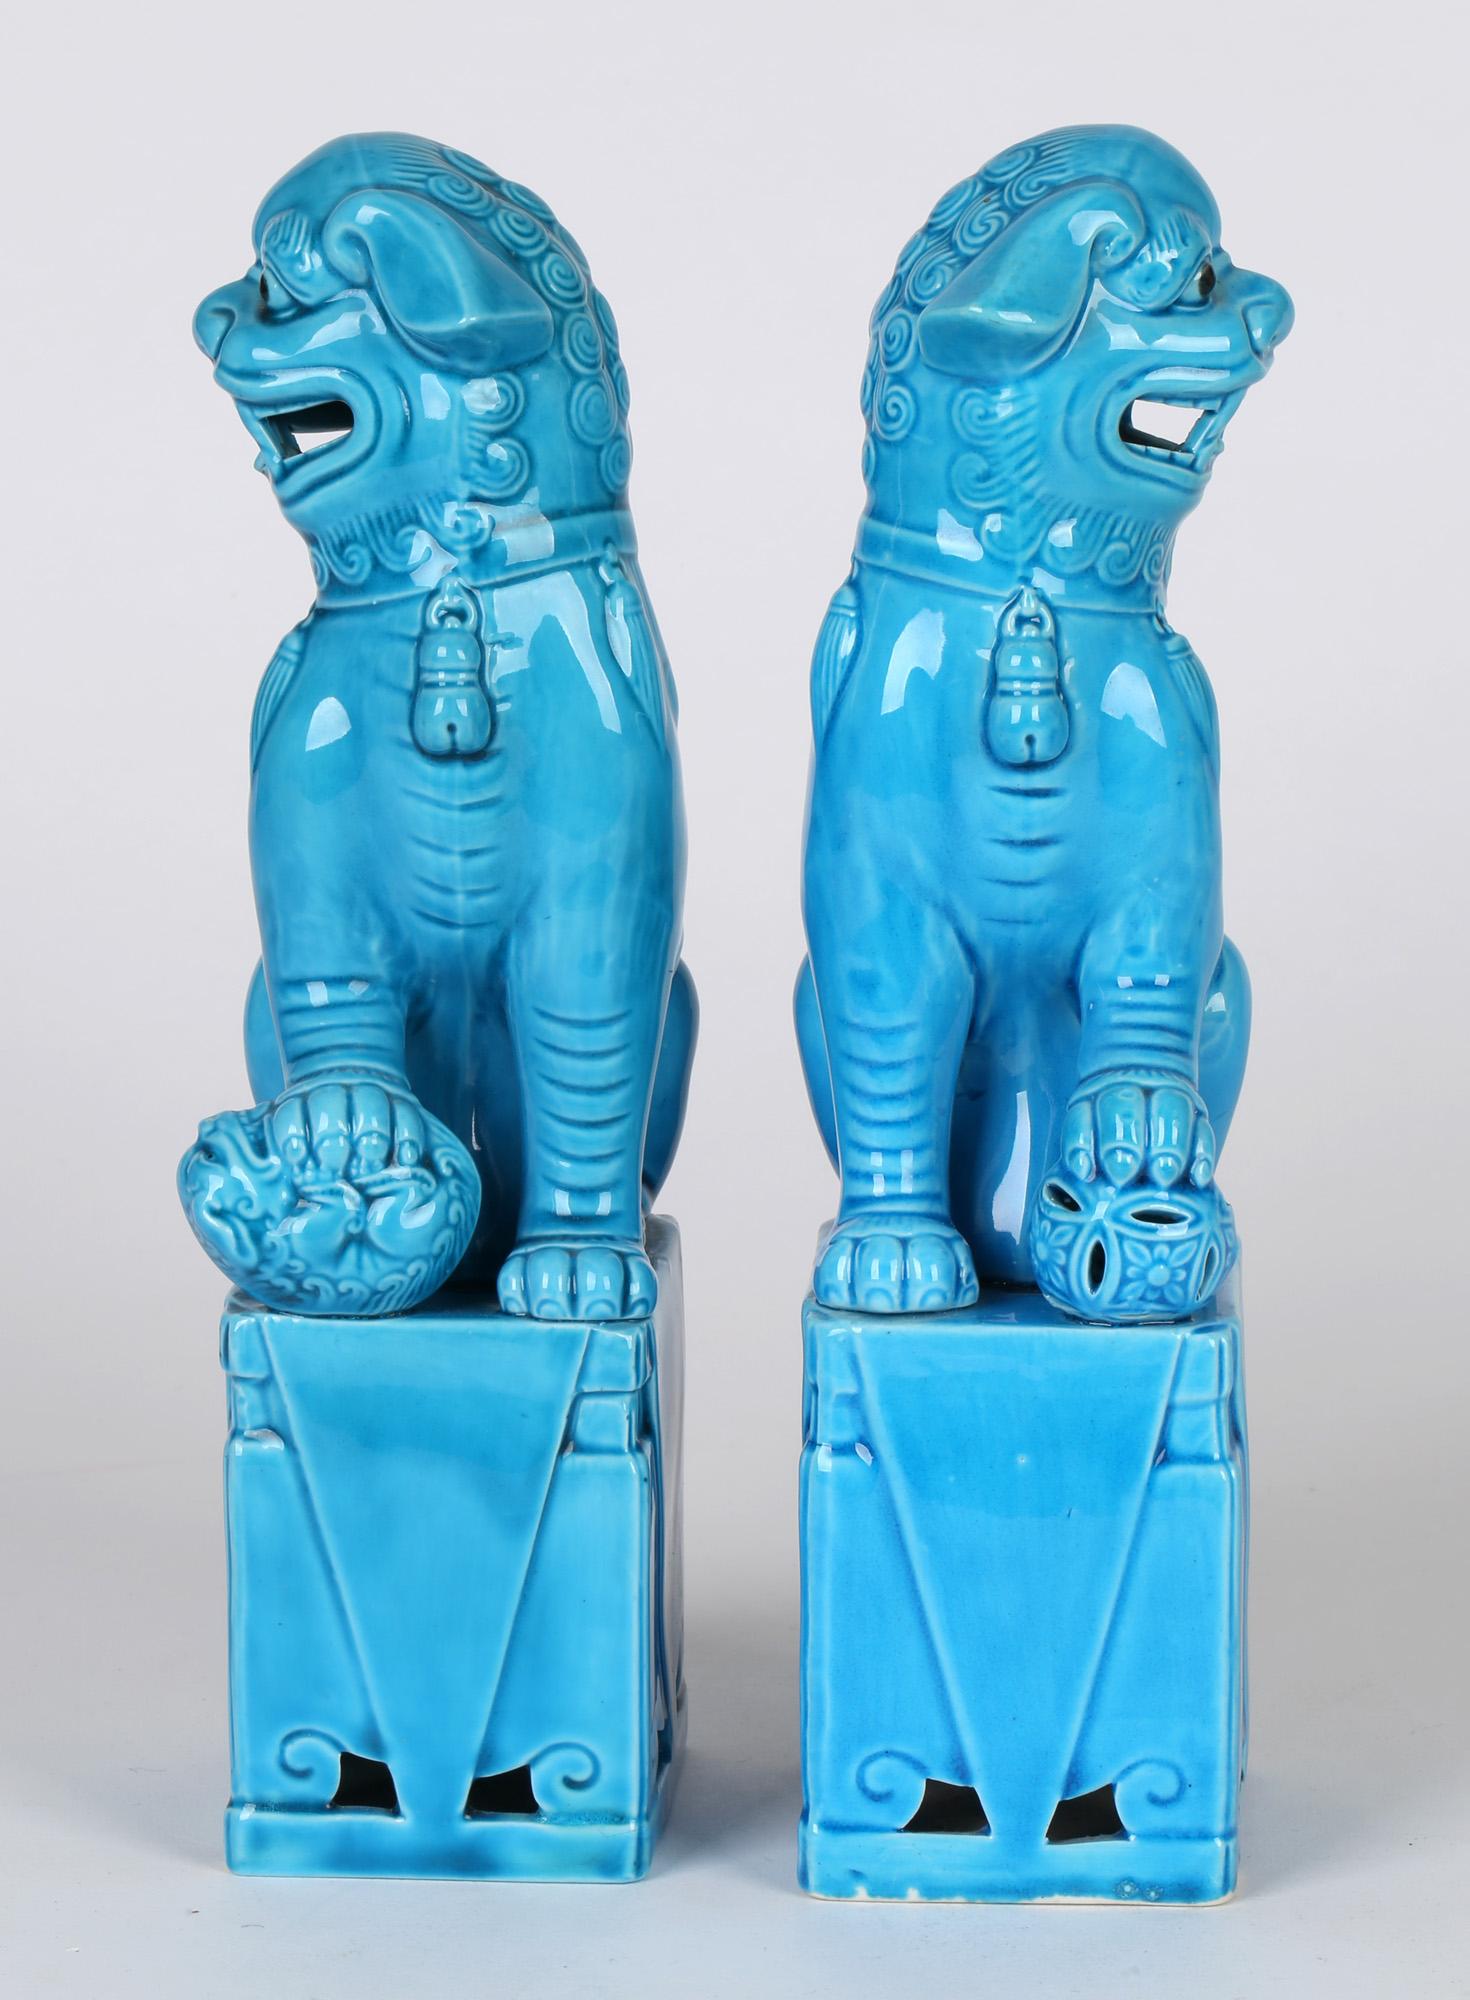 A very fine and attractive pair Chinese turquoise glazed dogs of foo figures dating from the first half of the 20th century. The hollow biscuit porcelain figures stand raised on a rectangular base and are looking sideways with open mouths showing